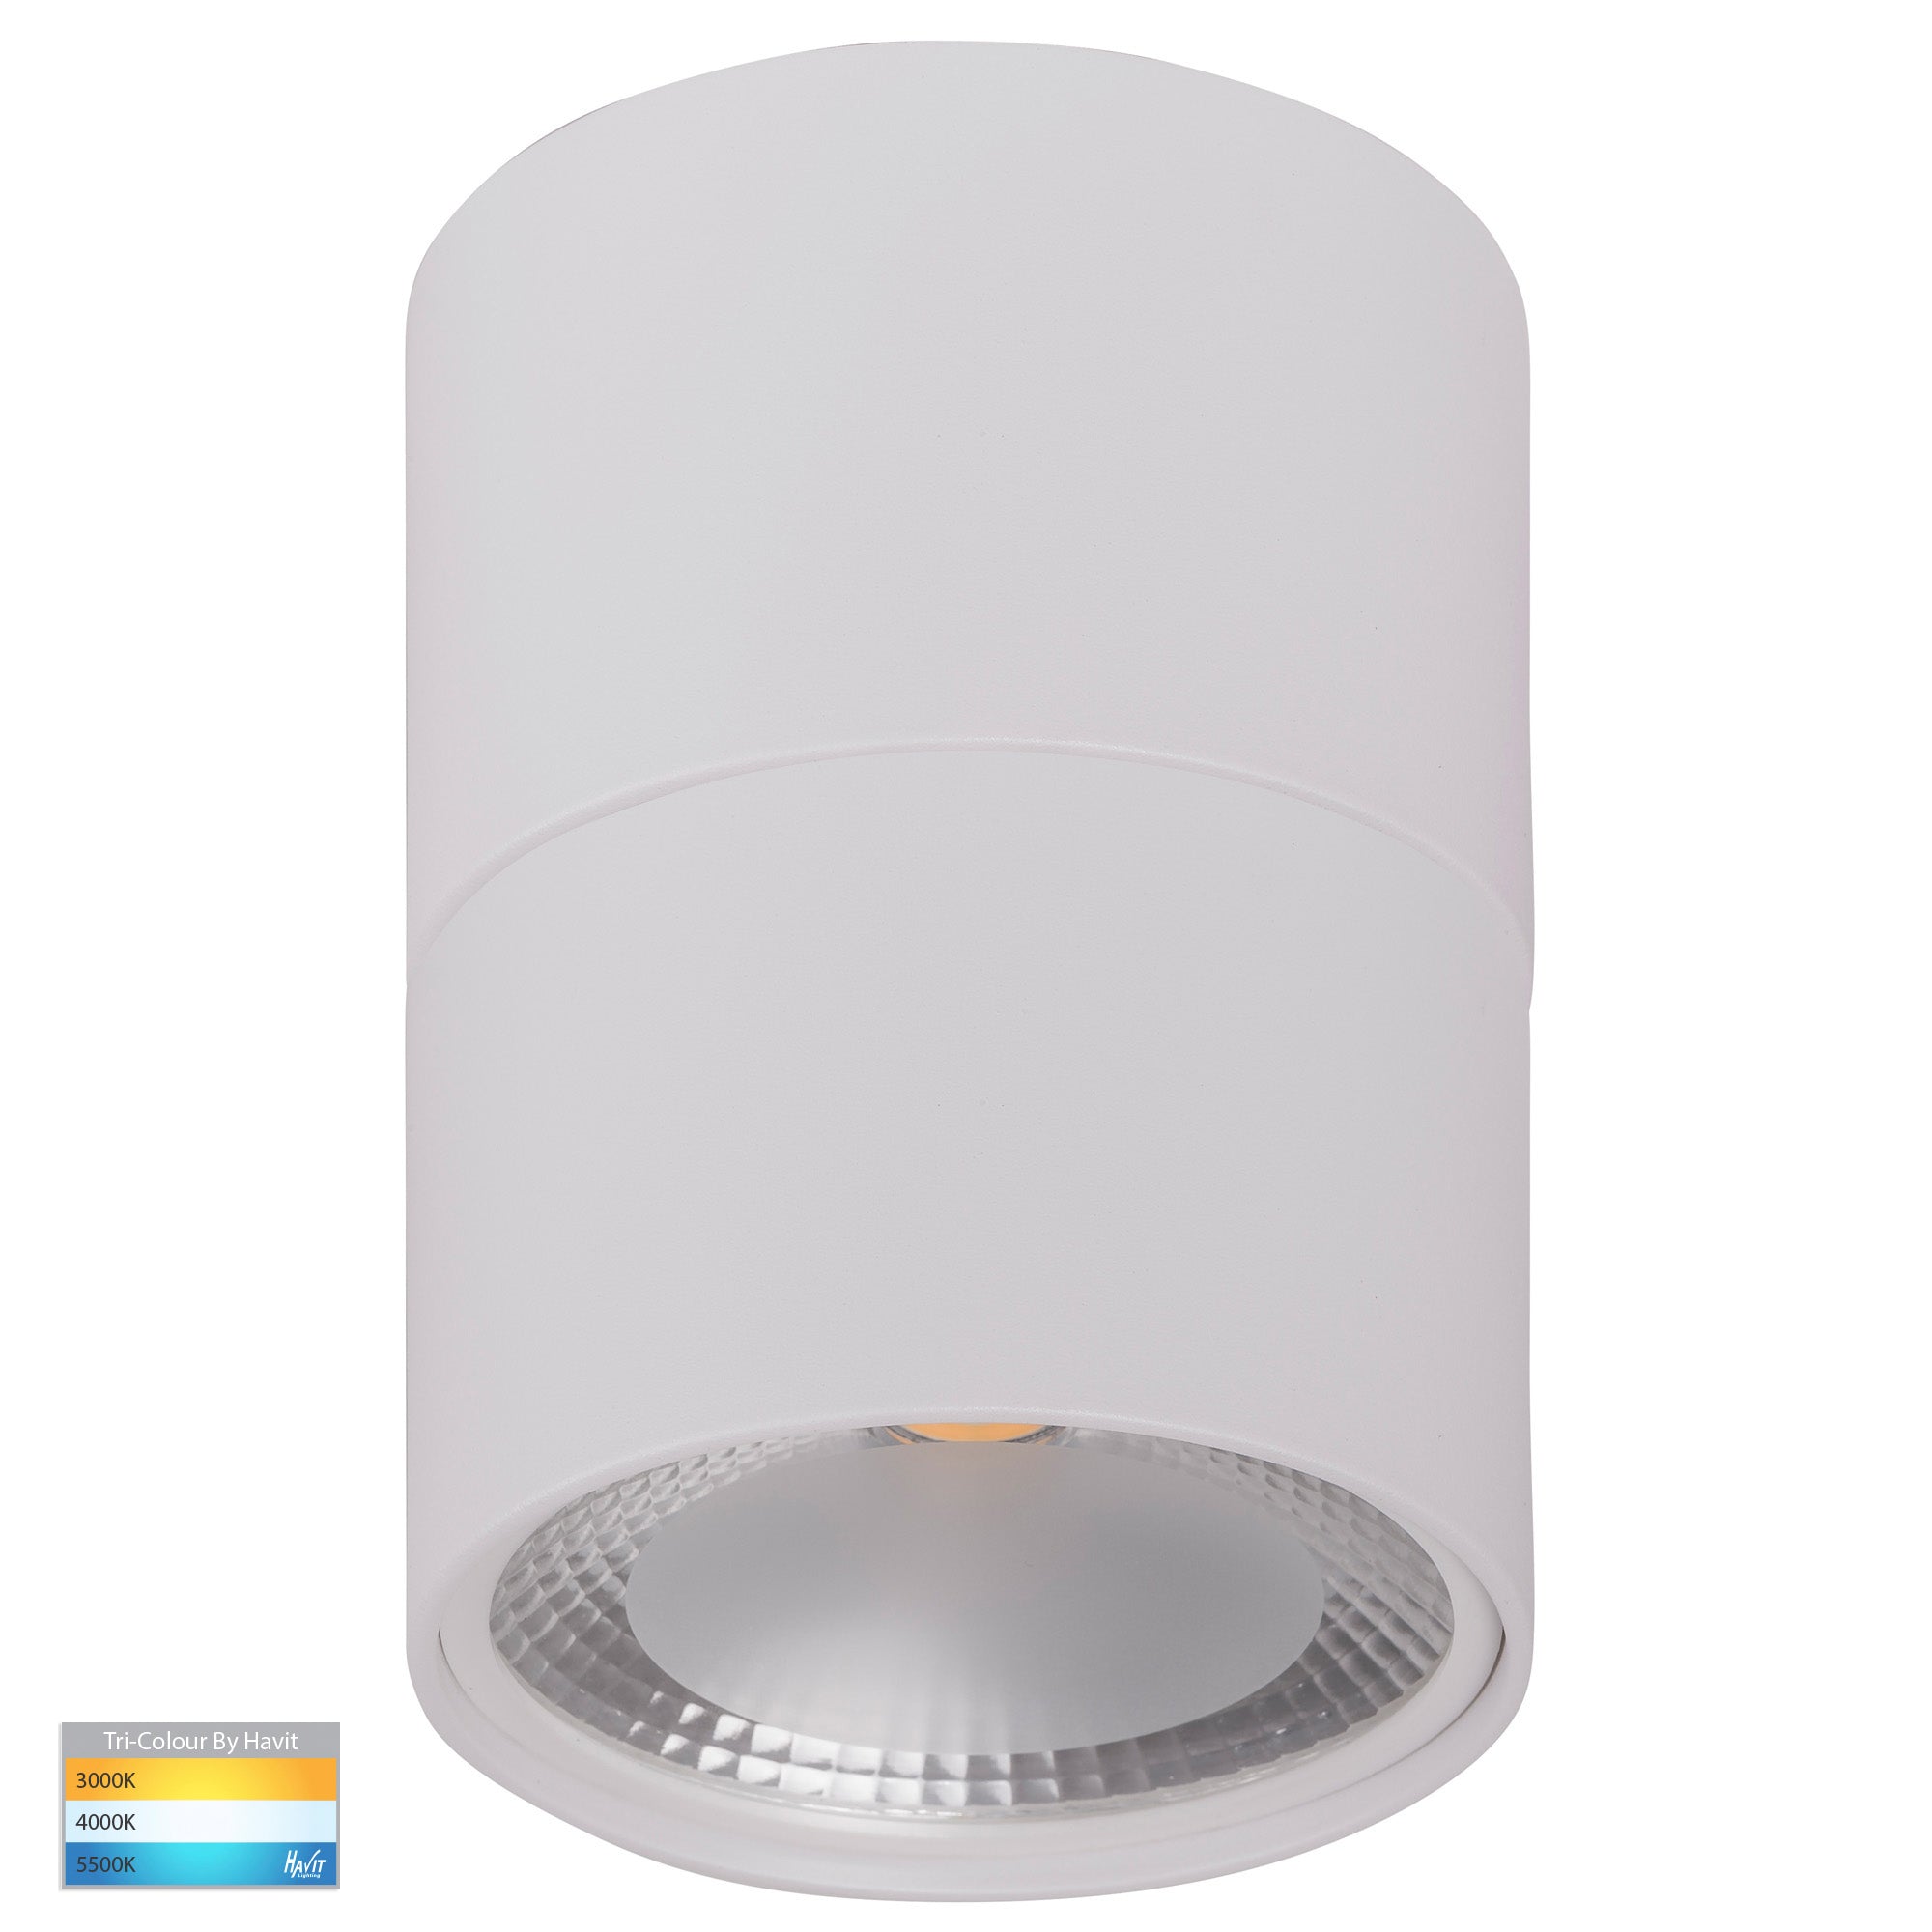 HV5803T-WHT-EXT | HV5803T-WHT-EXT-12V - Nella White 12w Surface Mounted LED Downlight with Extension